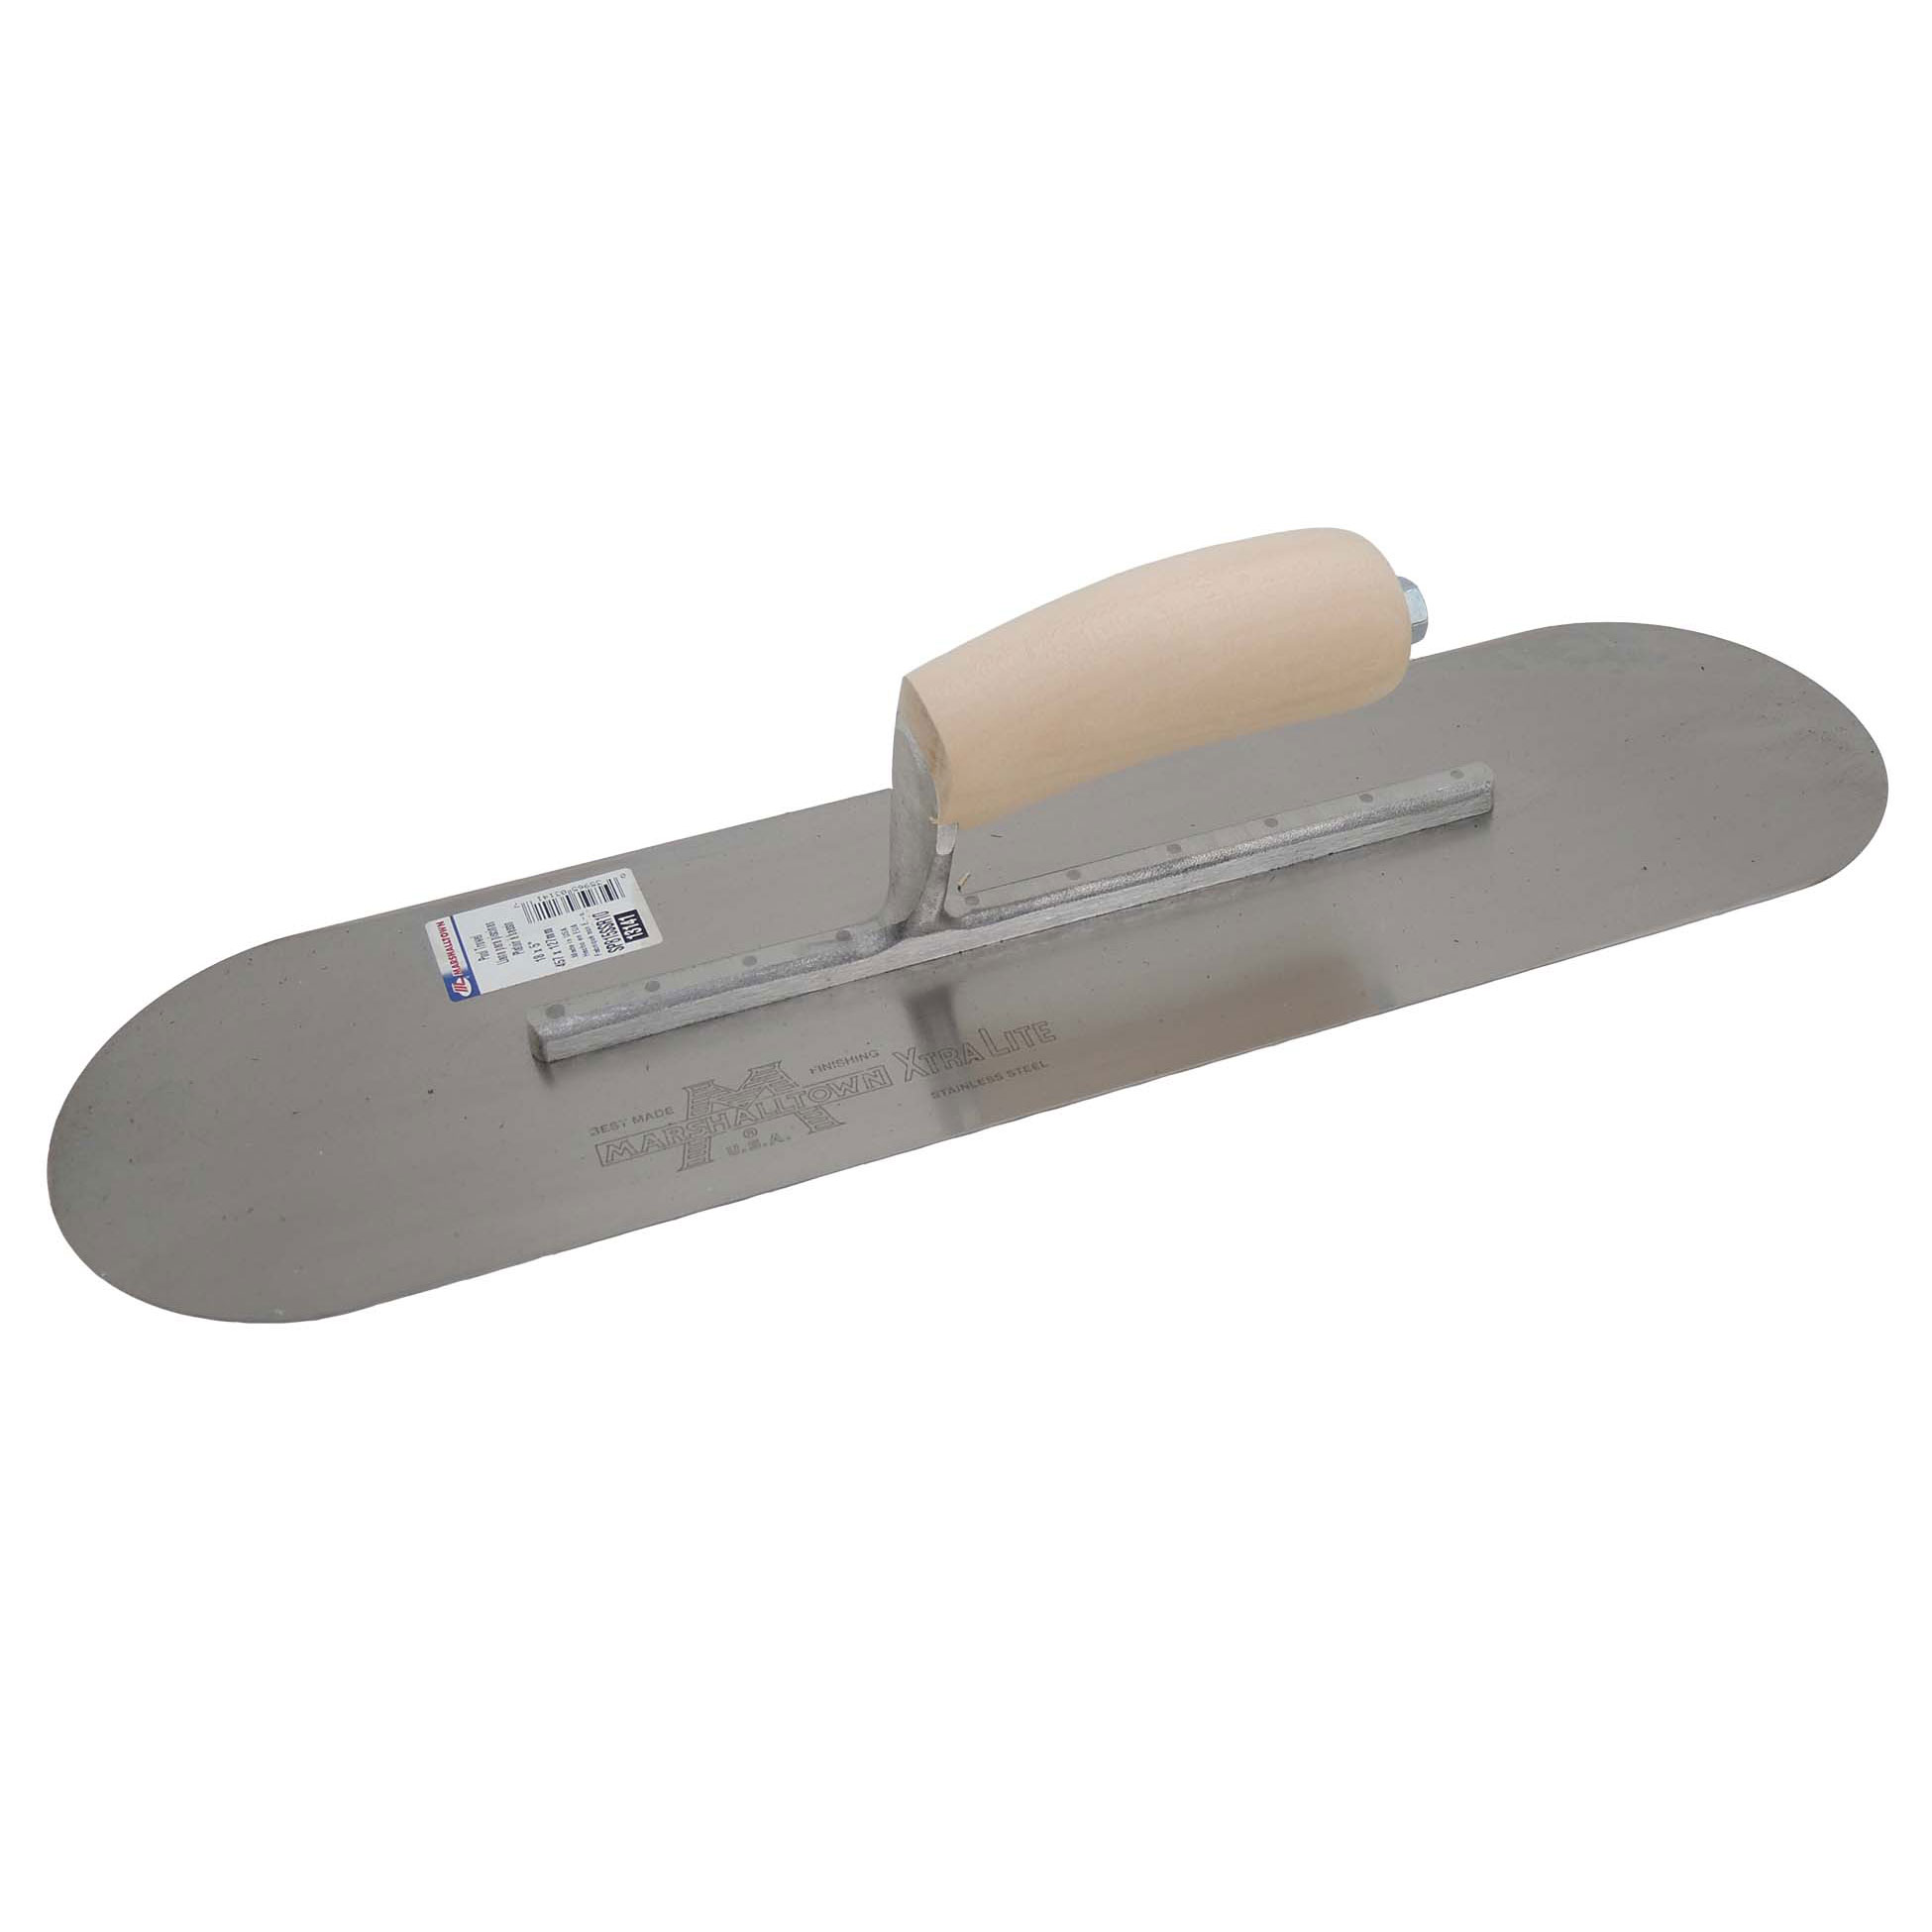 Marshalltown SP815SSR10 18in x 5in Pool Trowel with Exposed Rivet Trowels and Wood Handle SP815SSR10